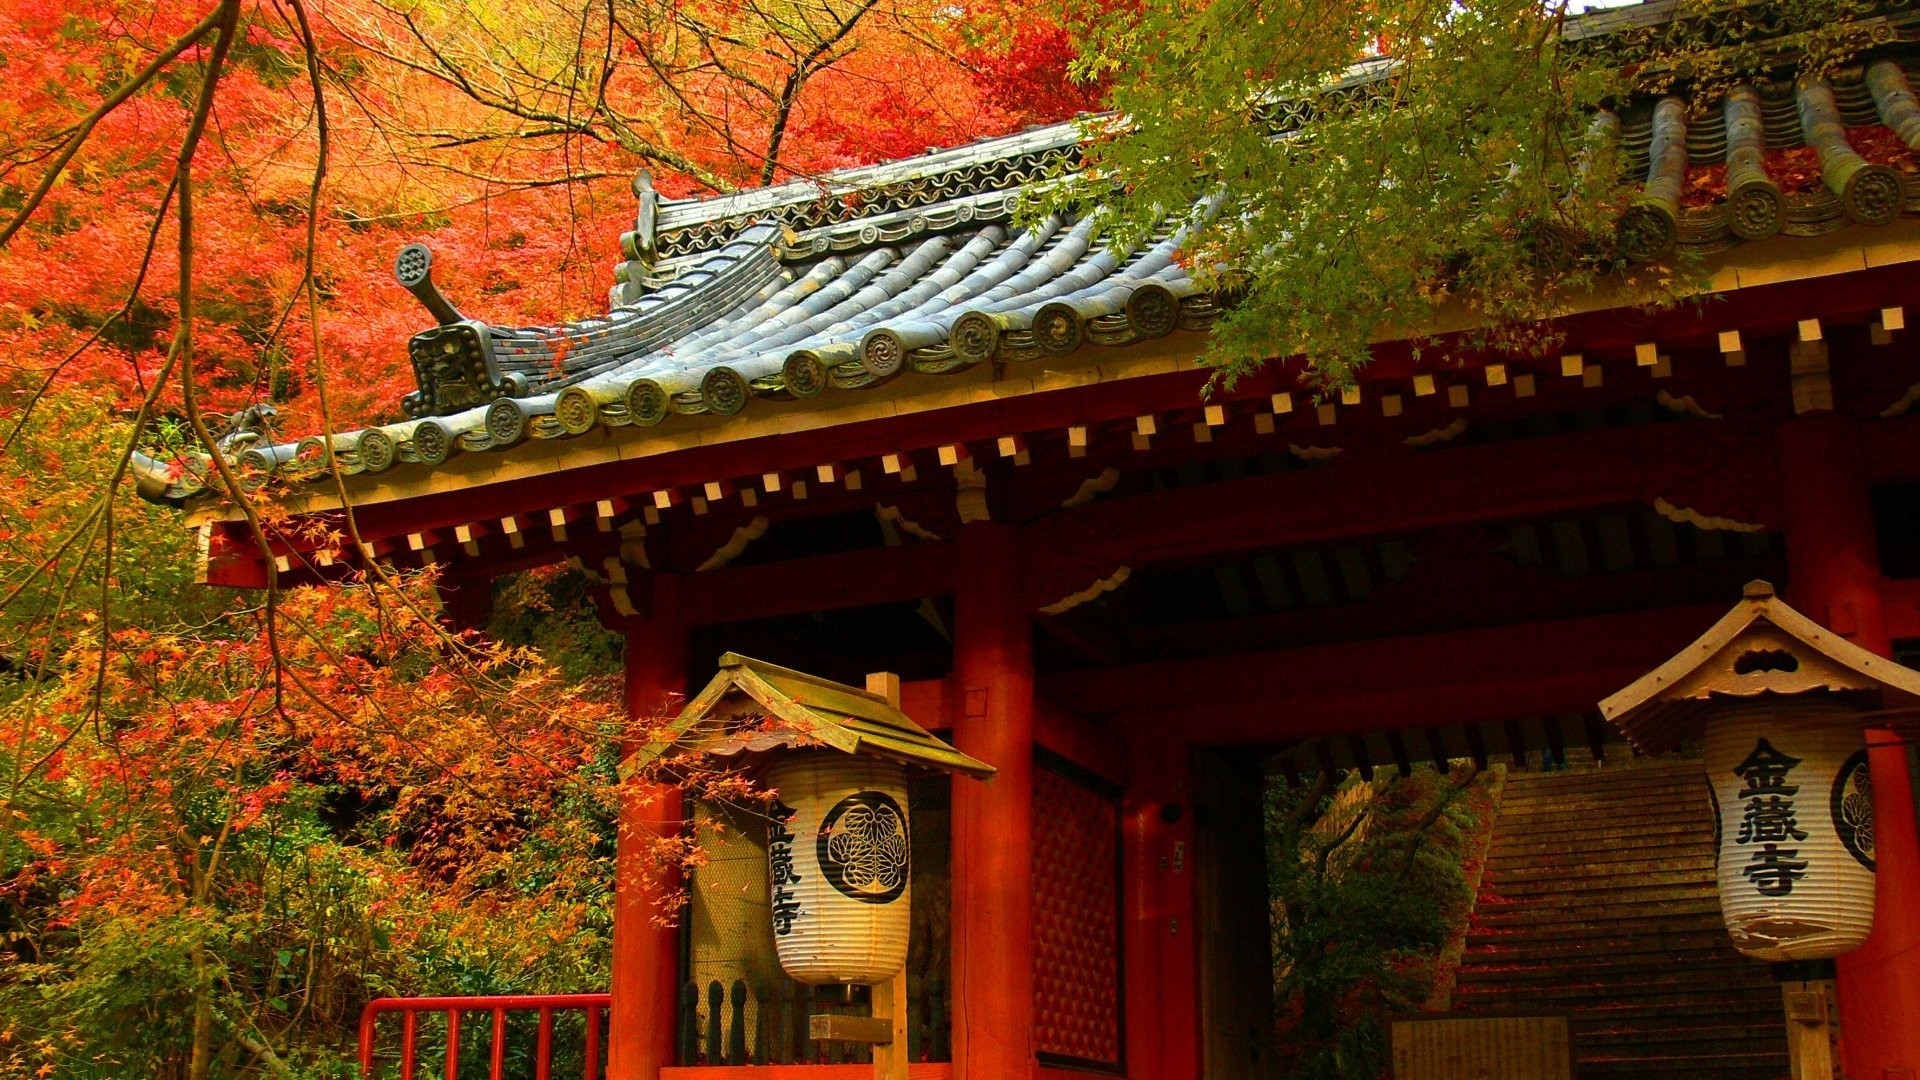 japanese, Asian, Oriental, Architecture, Buildings, Houses, Wood, Teak, Artistic, Roof, Tiles, Nature, Trees, Forest, Autumn, Fall, Seasons, Leaves, Color Wallpaper HD / Desktop and Mobile Background